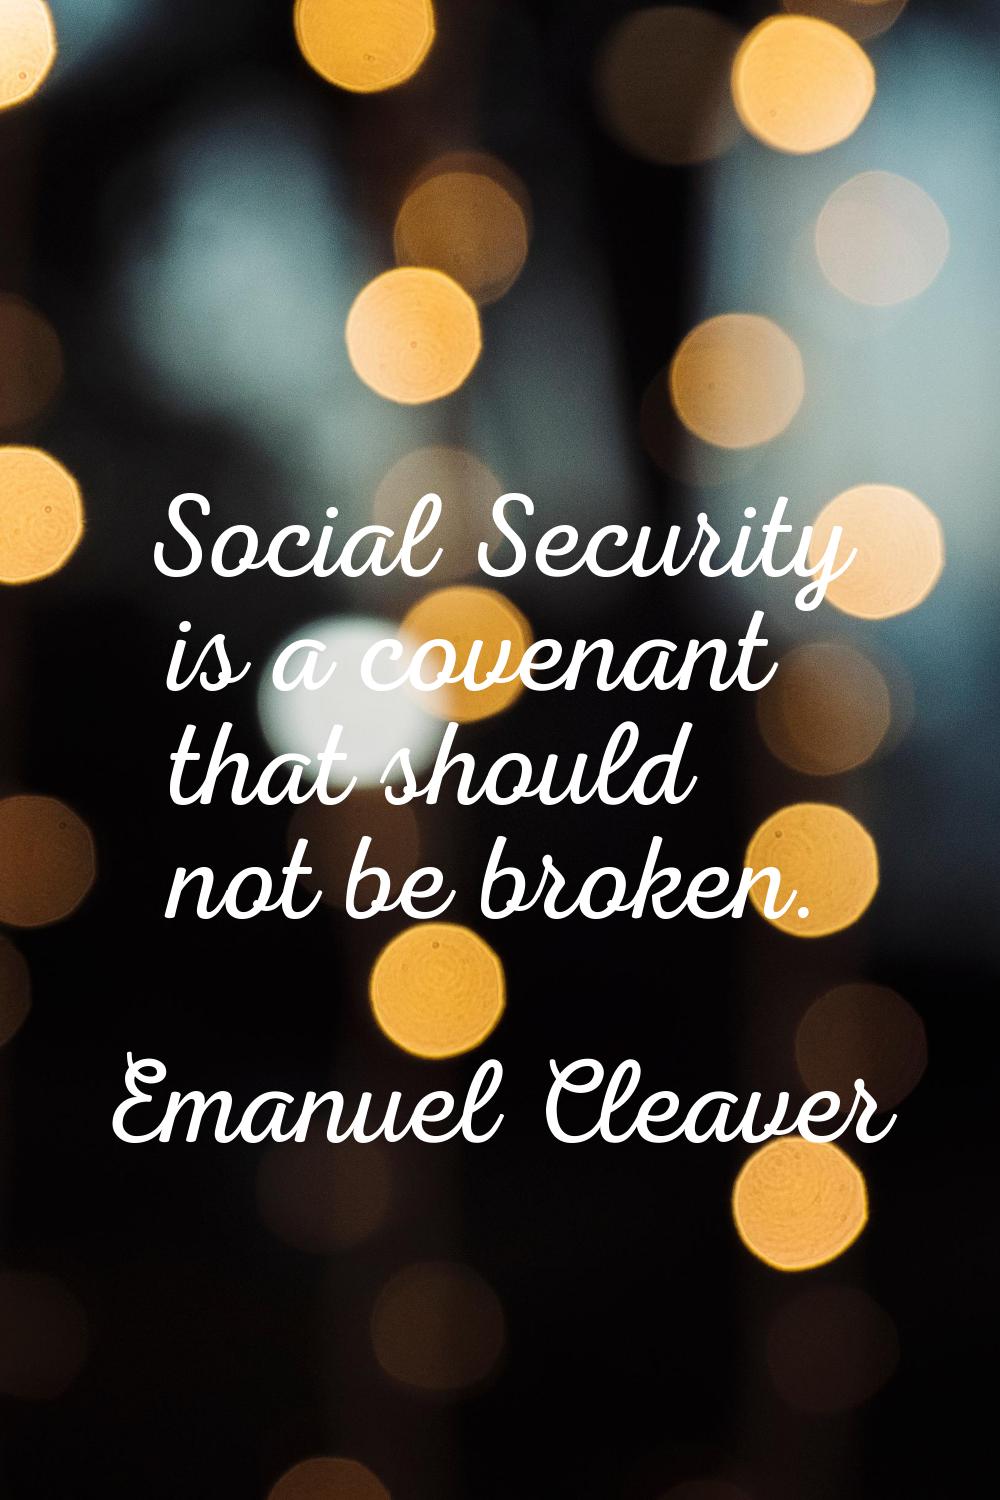 Social Security is a covenant that should not be broken.